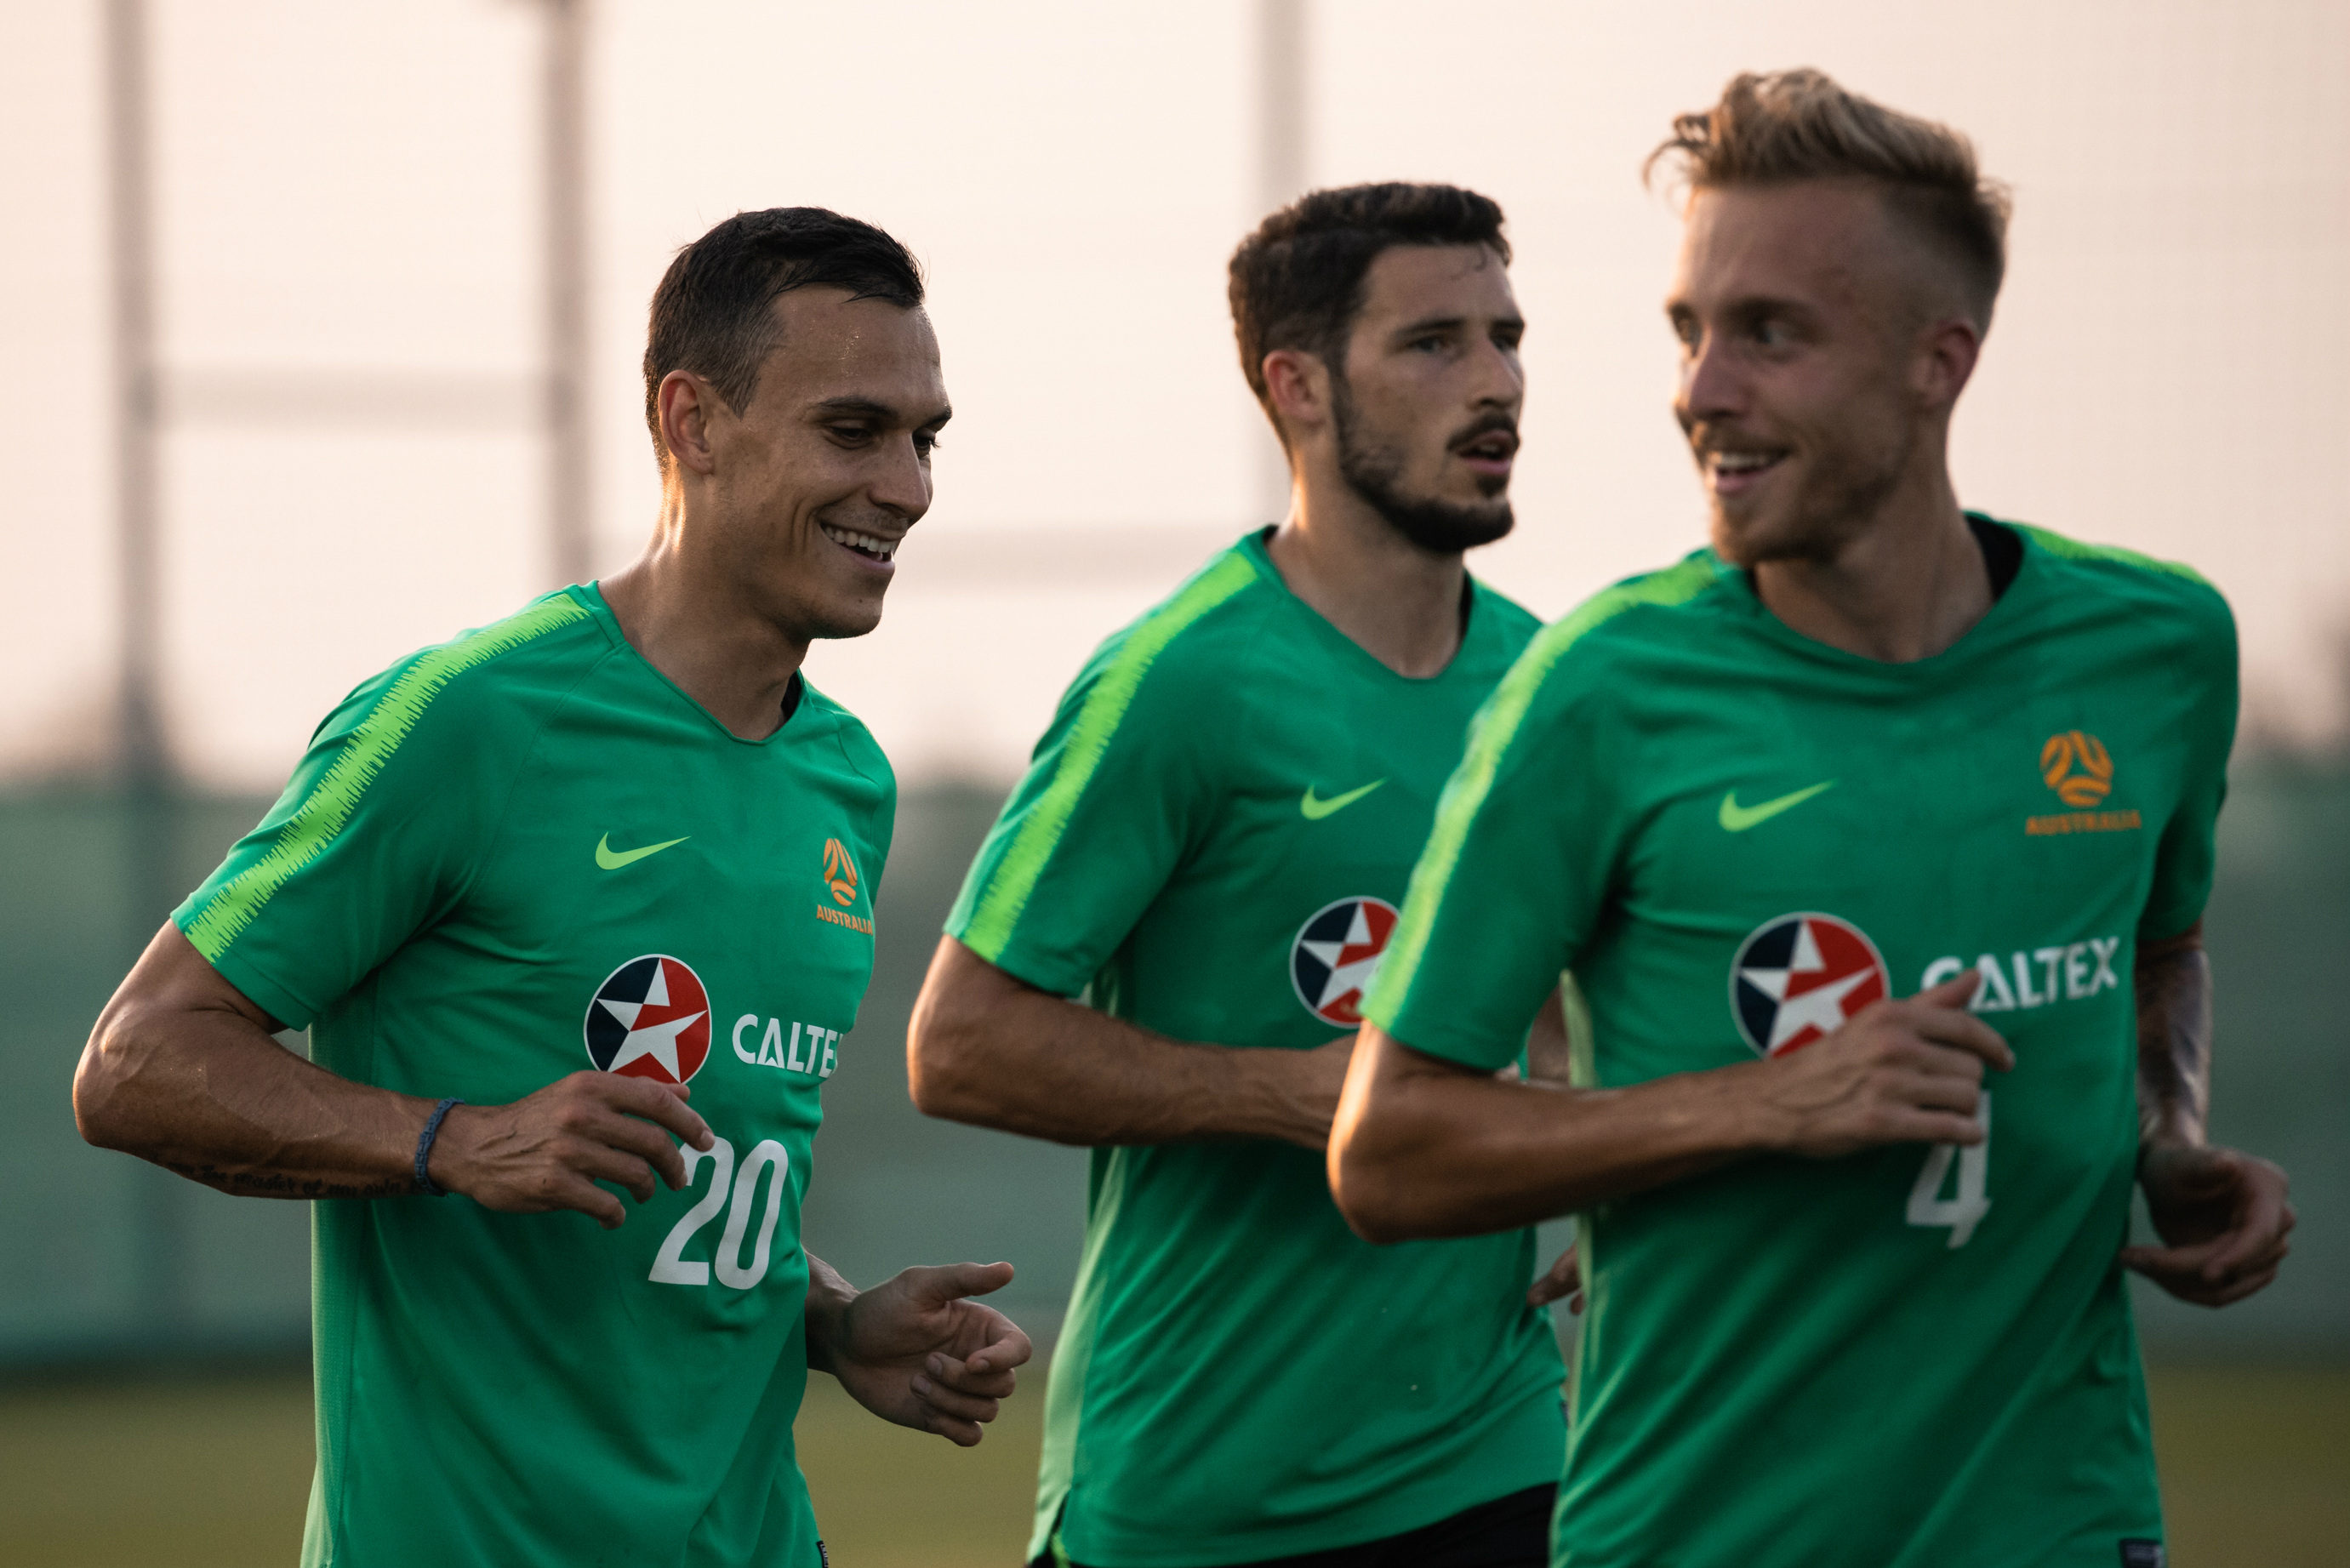 The week-long camp in Dubai is just what the Caltex Socceroos needed, according to Trent Sainsbury